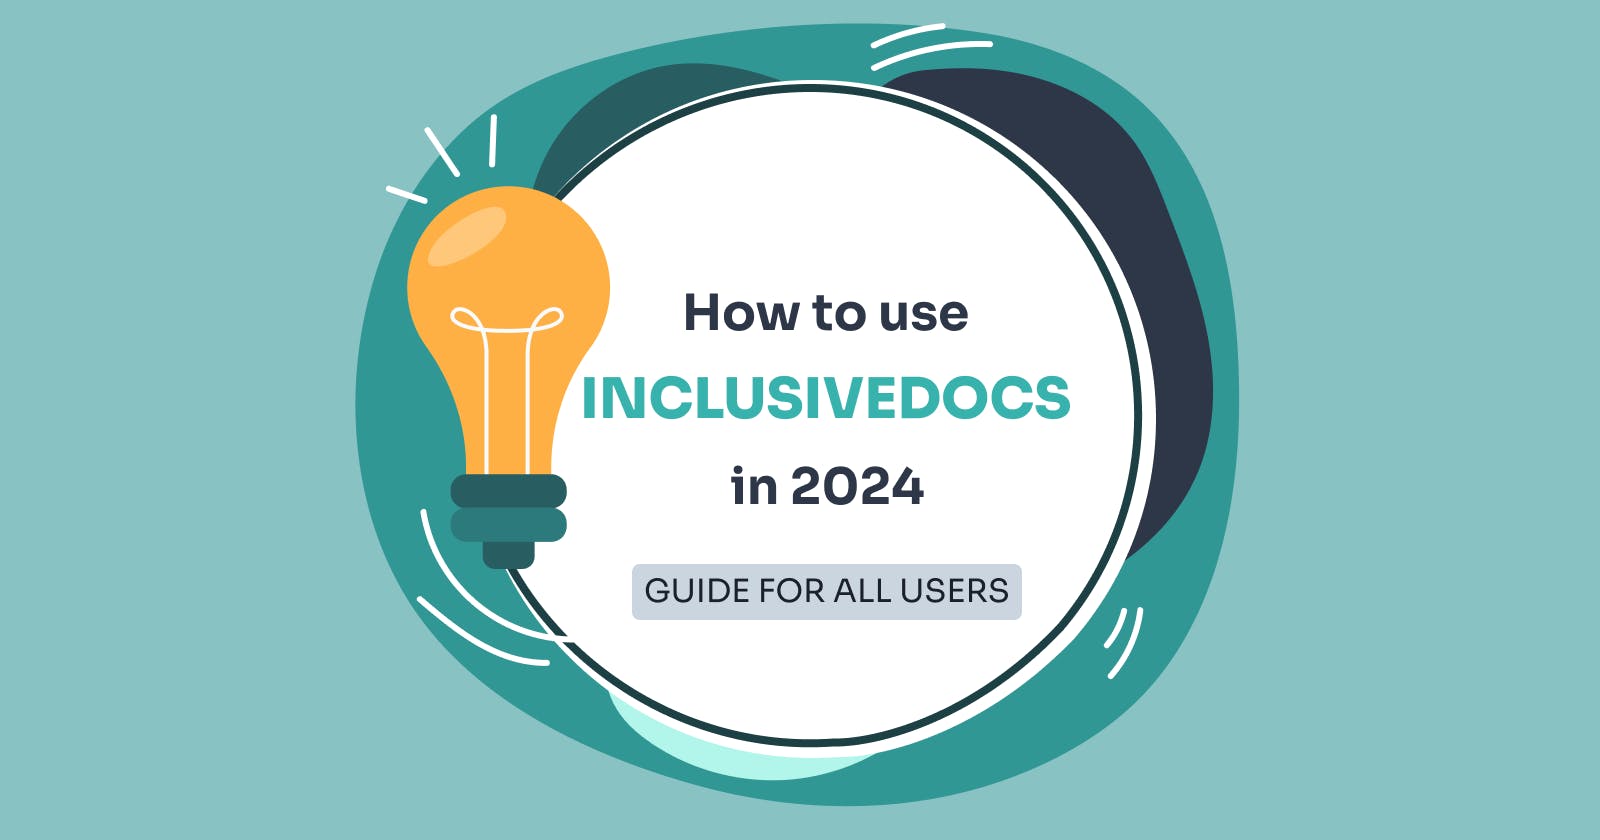 How to Use InslusiveDocs in 2024: Guide for All Users